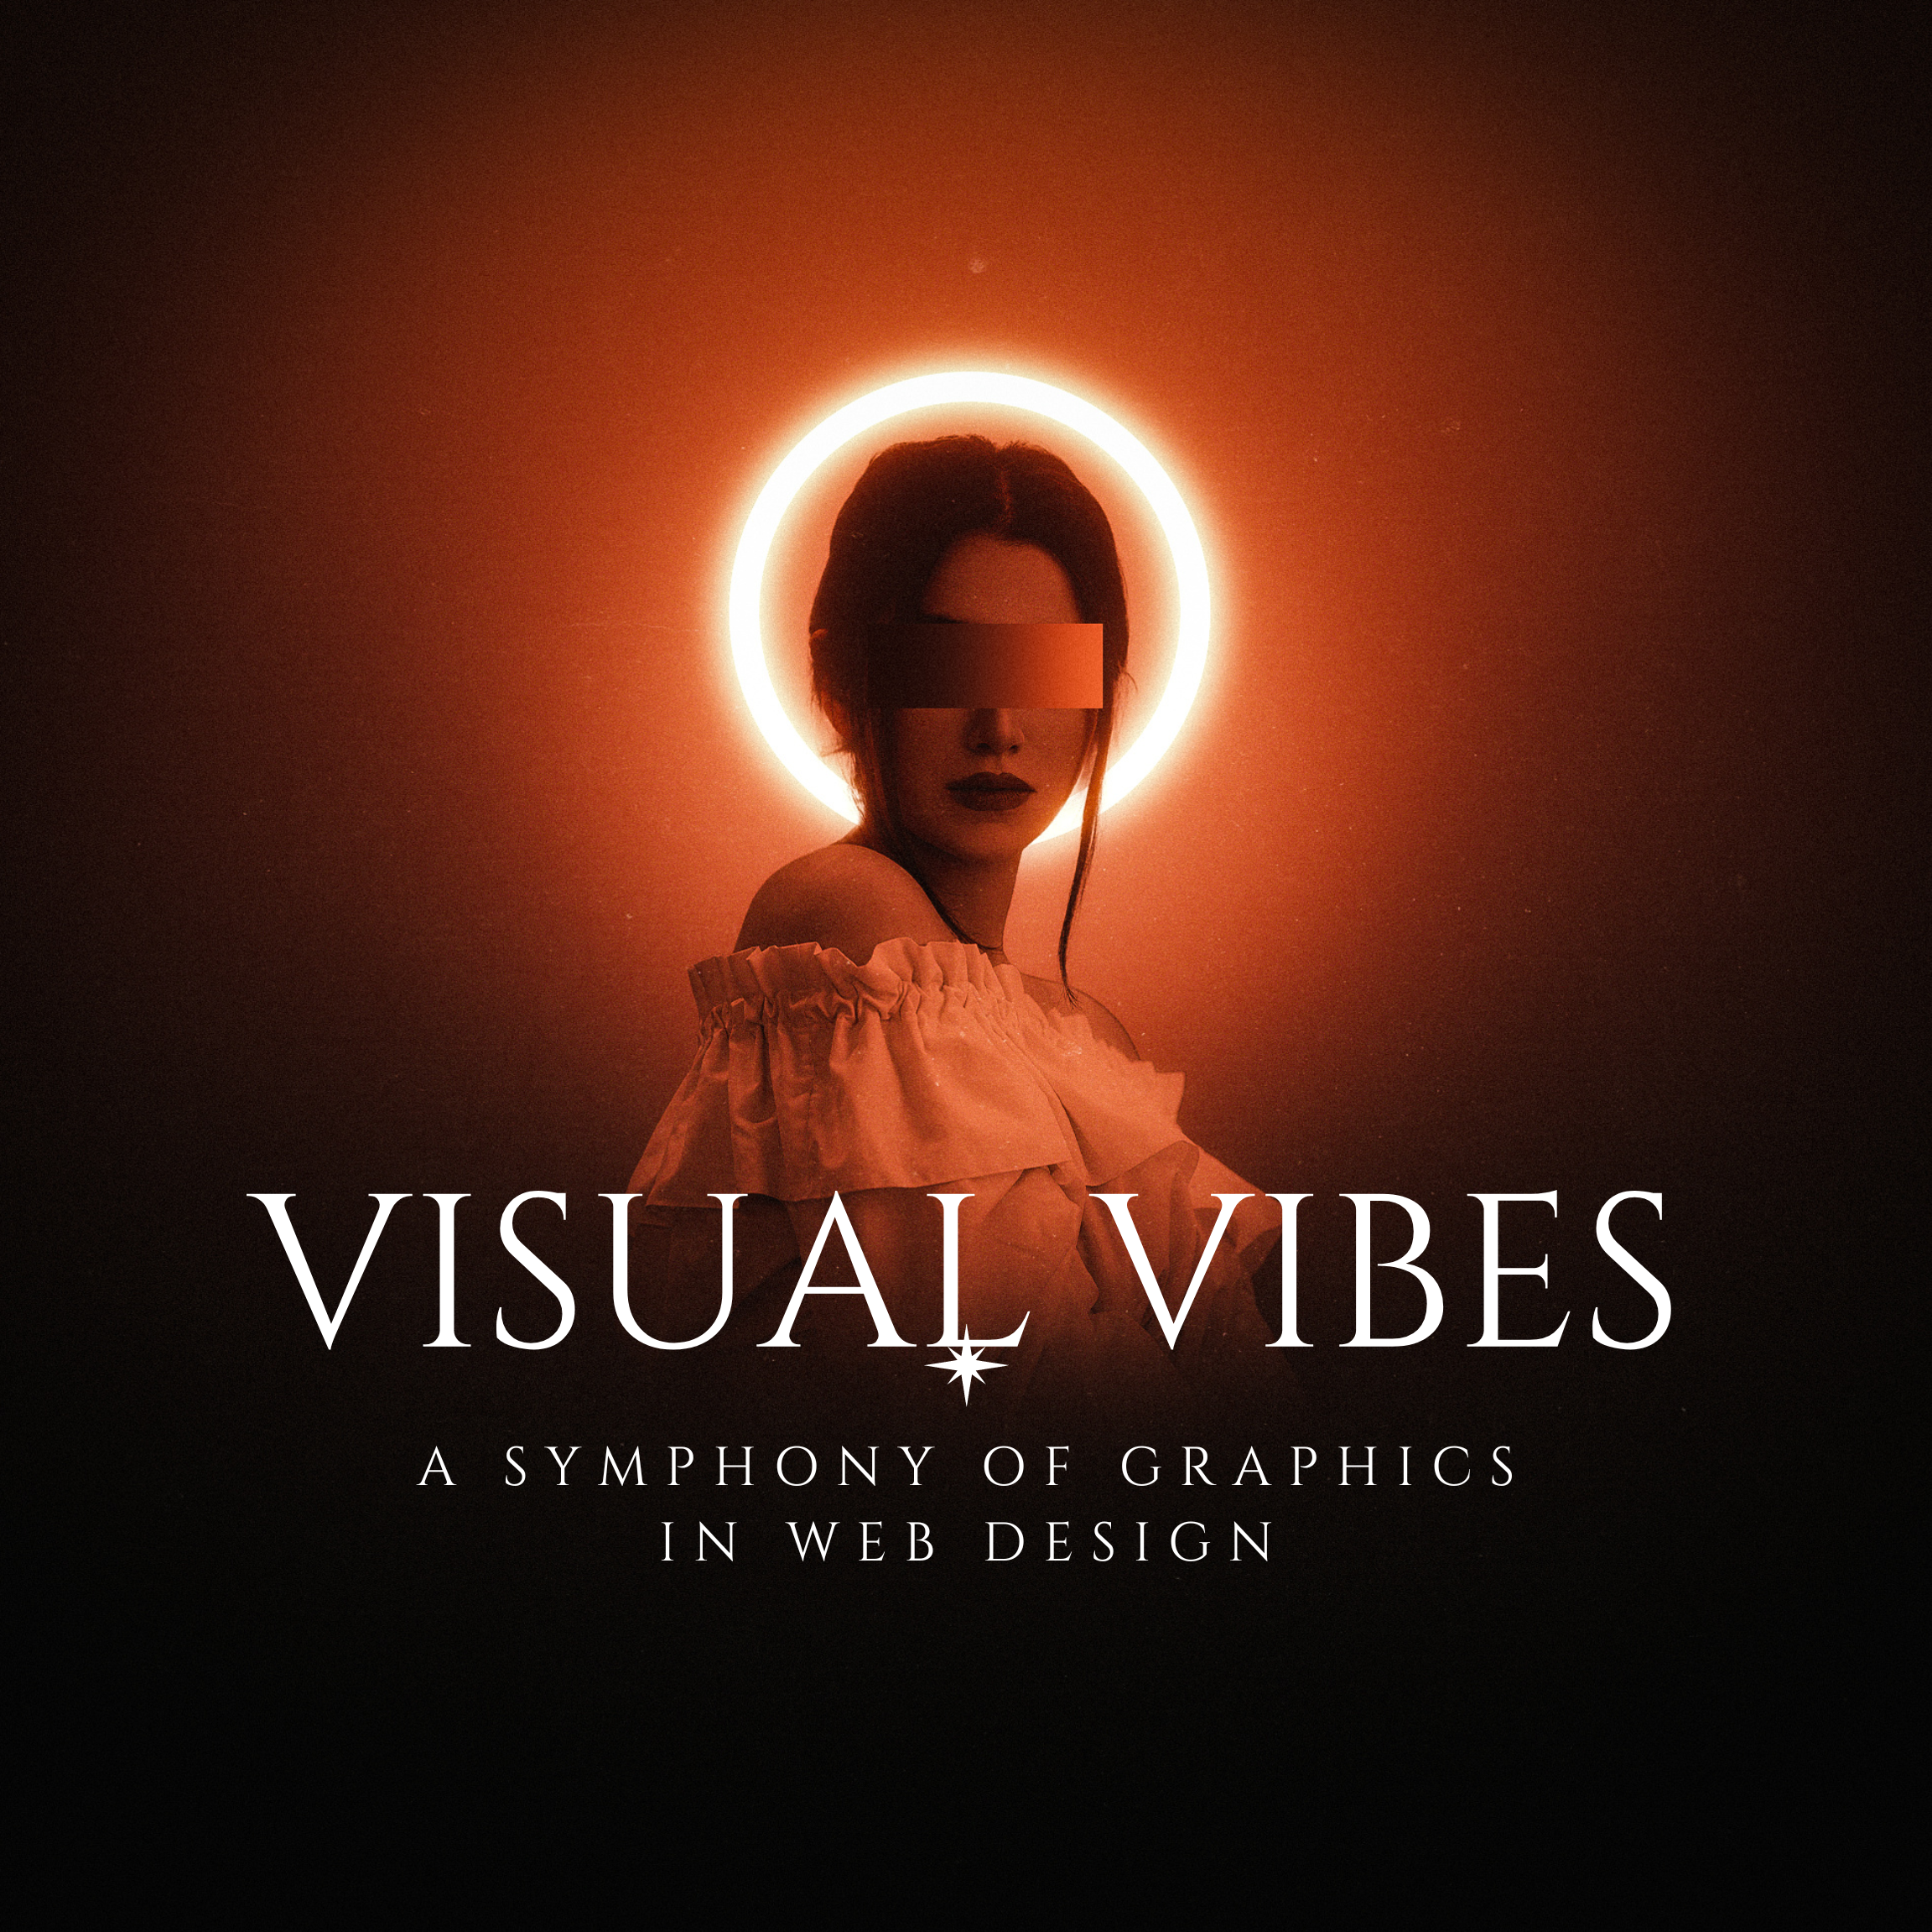 Visual Vibes: A Symphony of Graphics in Web Design